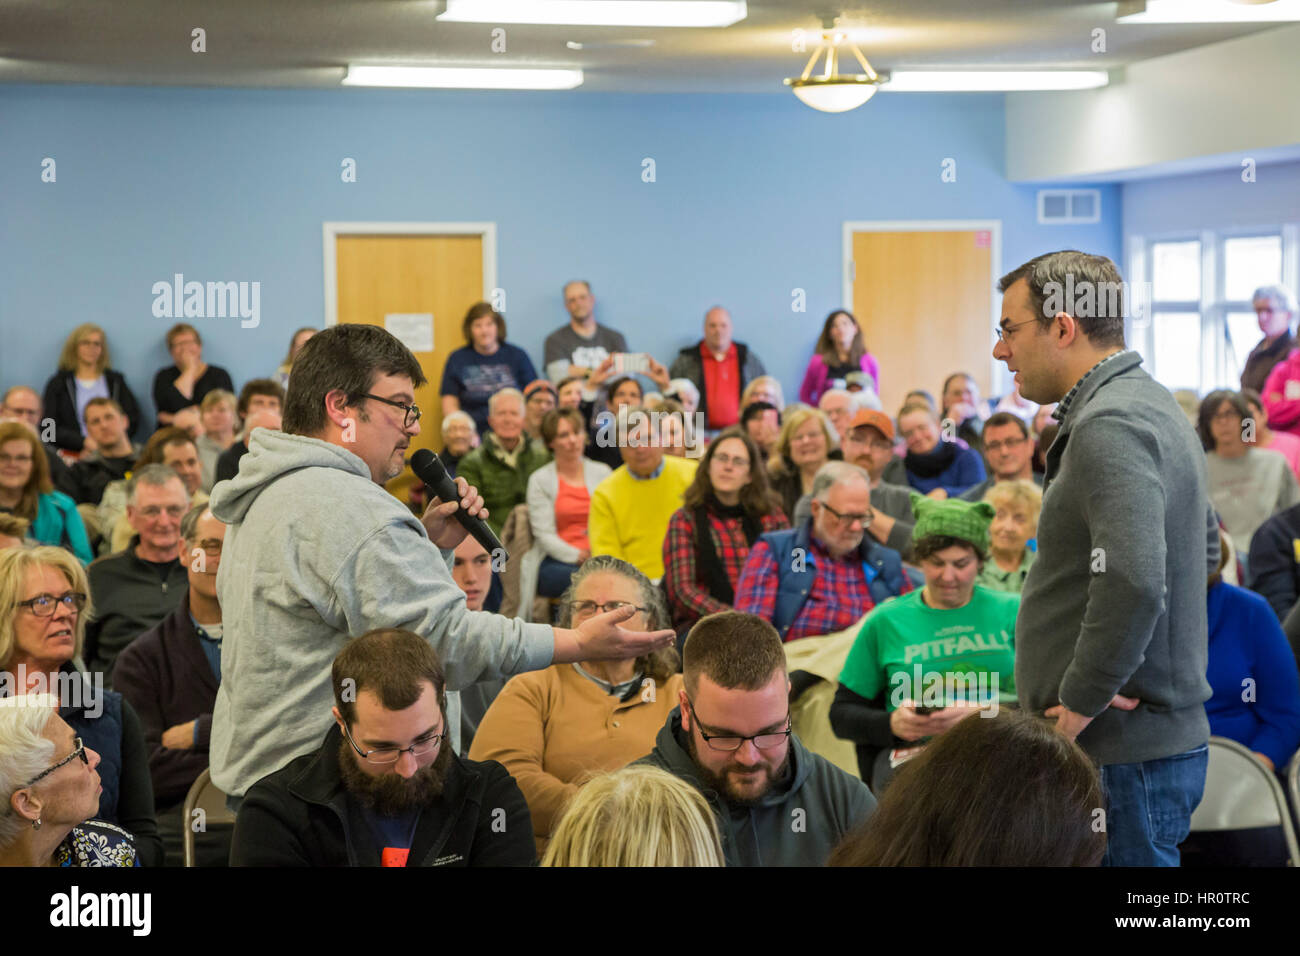 Hastings, Michigan, USA. 25 February 20Hastings, Michigan, USA. 25 February 2017.17. Republican Congressman Justin Amash (right) listens to Eric Anderson, chair of the Barry County Democratic Party, during a town hall meeting for his constituents in Michigan's Third Congressional District. Many questioners expressed strong opposition to Republicans' plan to repeal the Affordable Care Act. Credit: Jim West/Alamy Live News Stock Photo